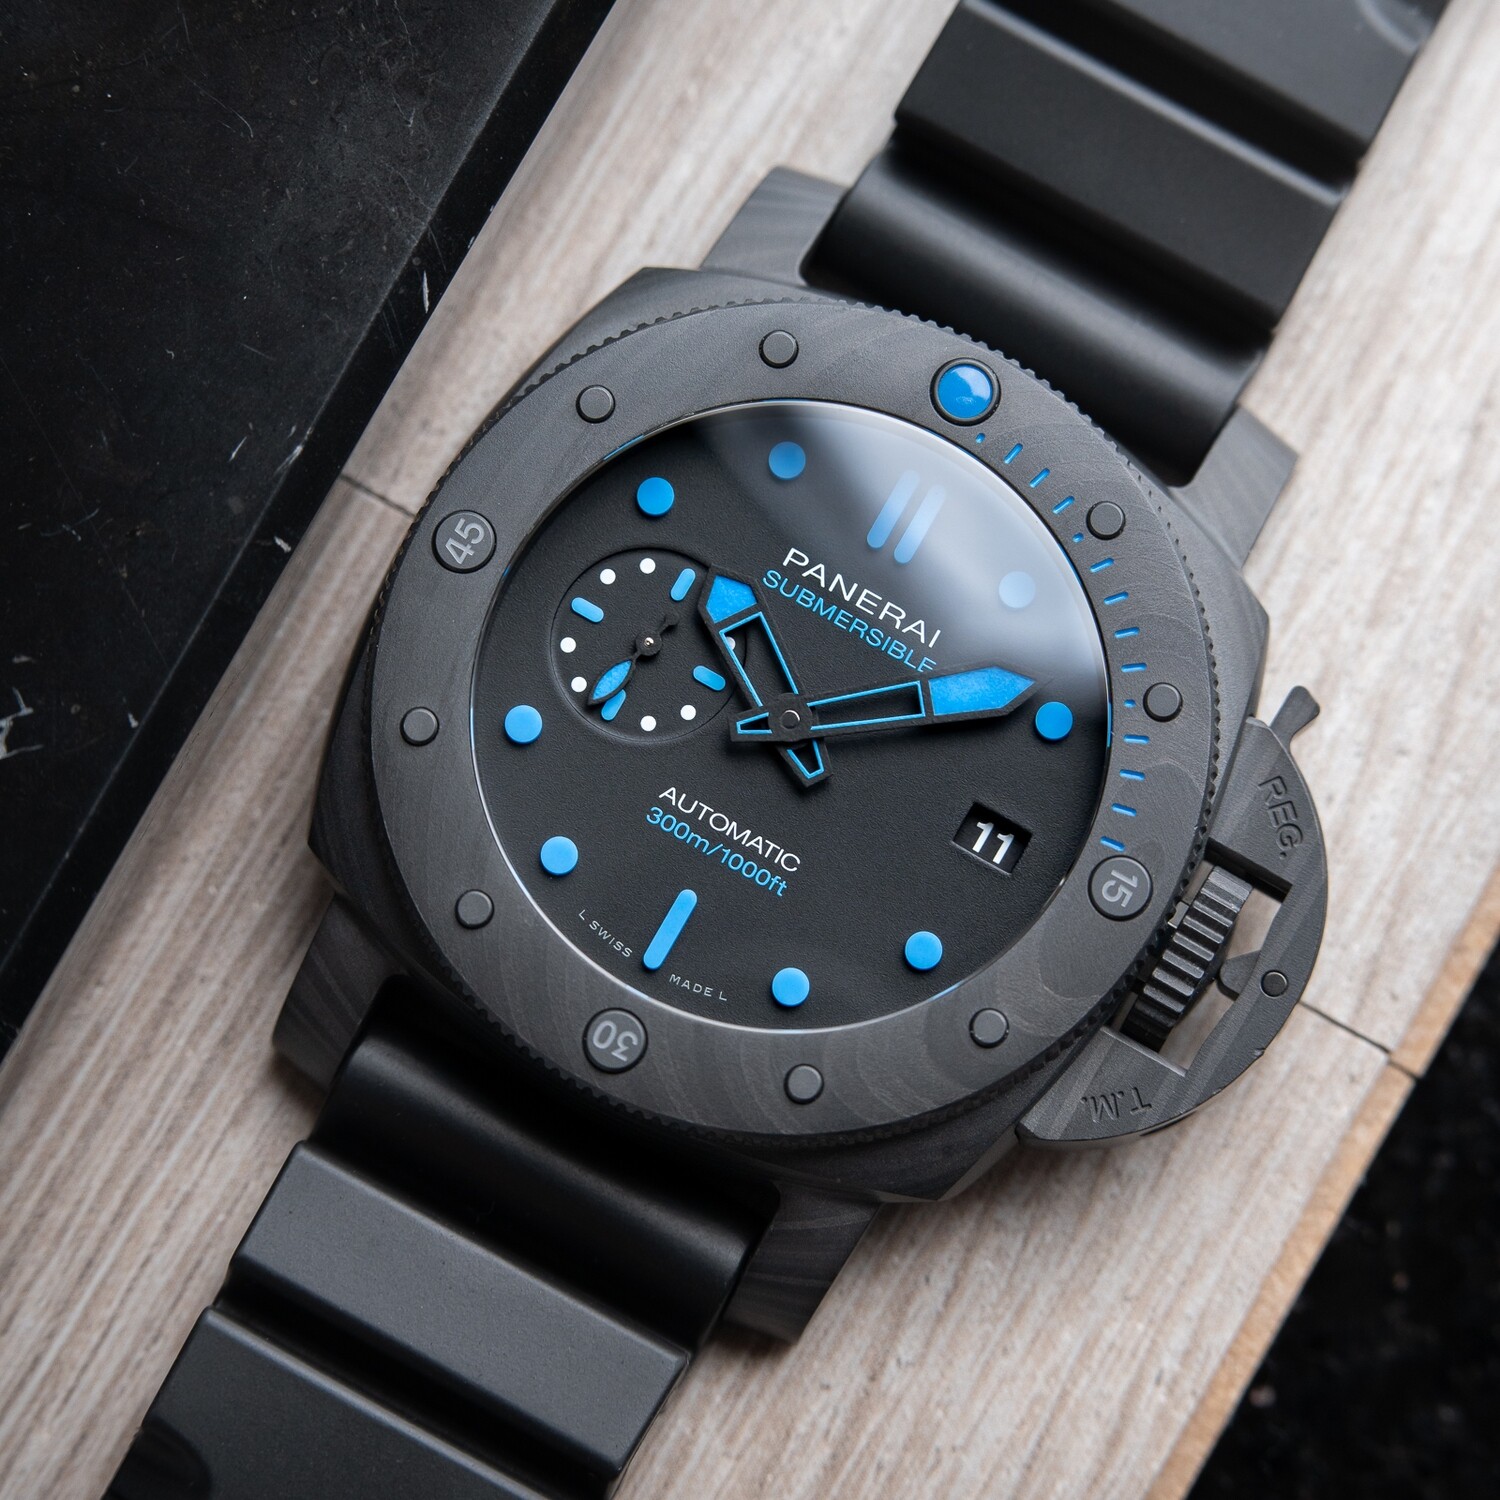 Panerai Luminor Submersible Carbotech Date Black Blue Automatic PAM960 42mm